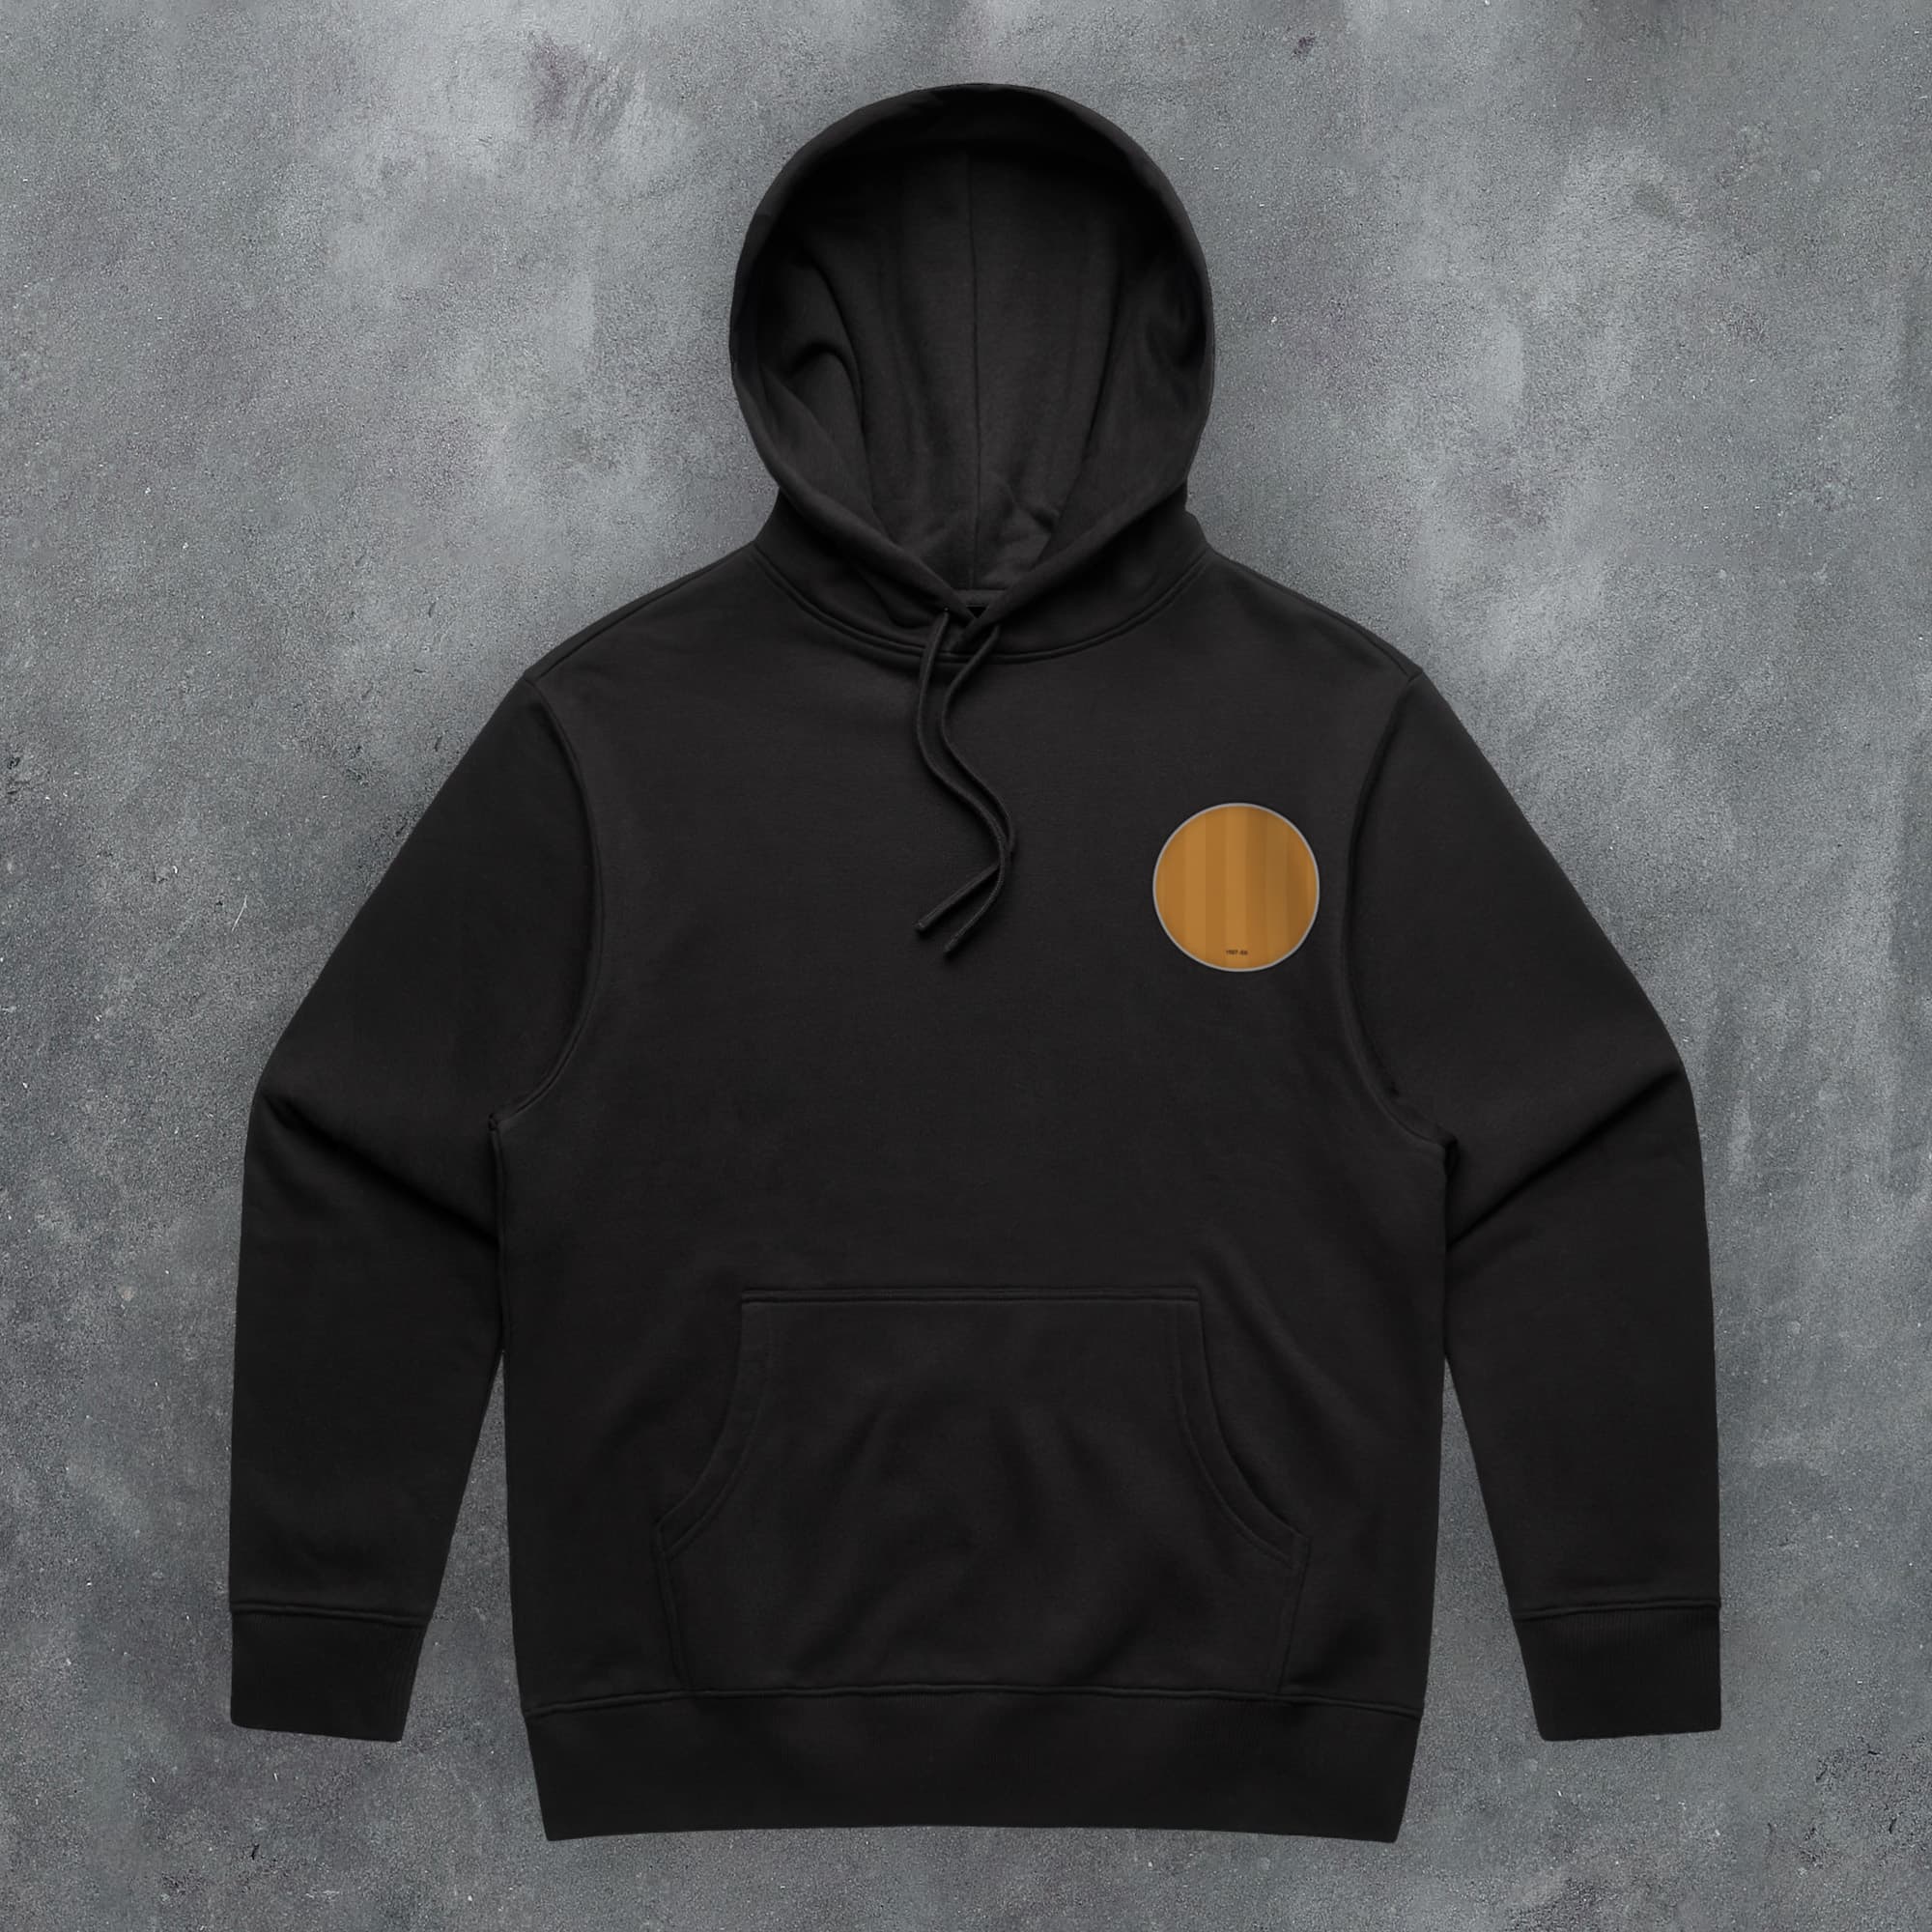 a black hoodie with an orange circle on the front